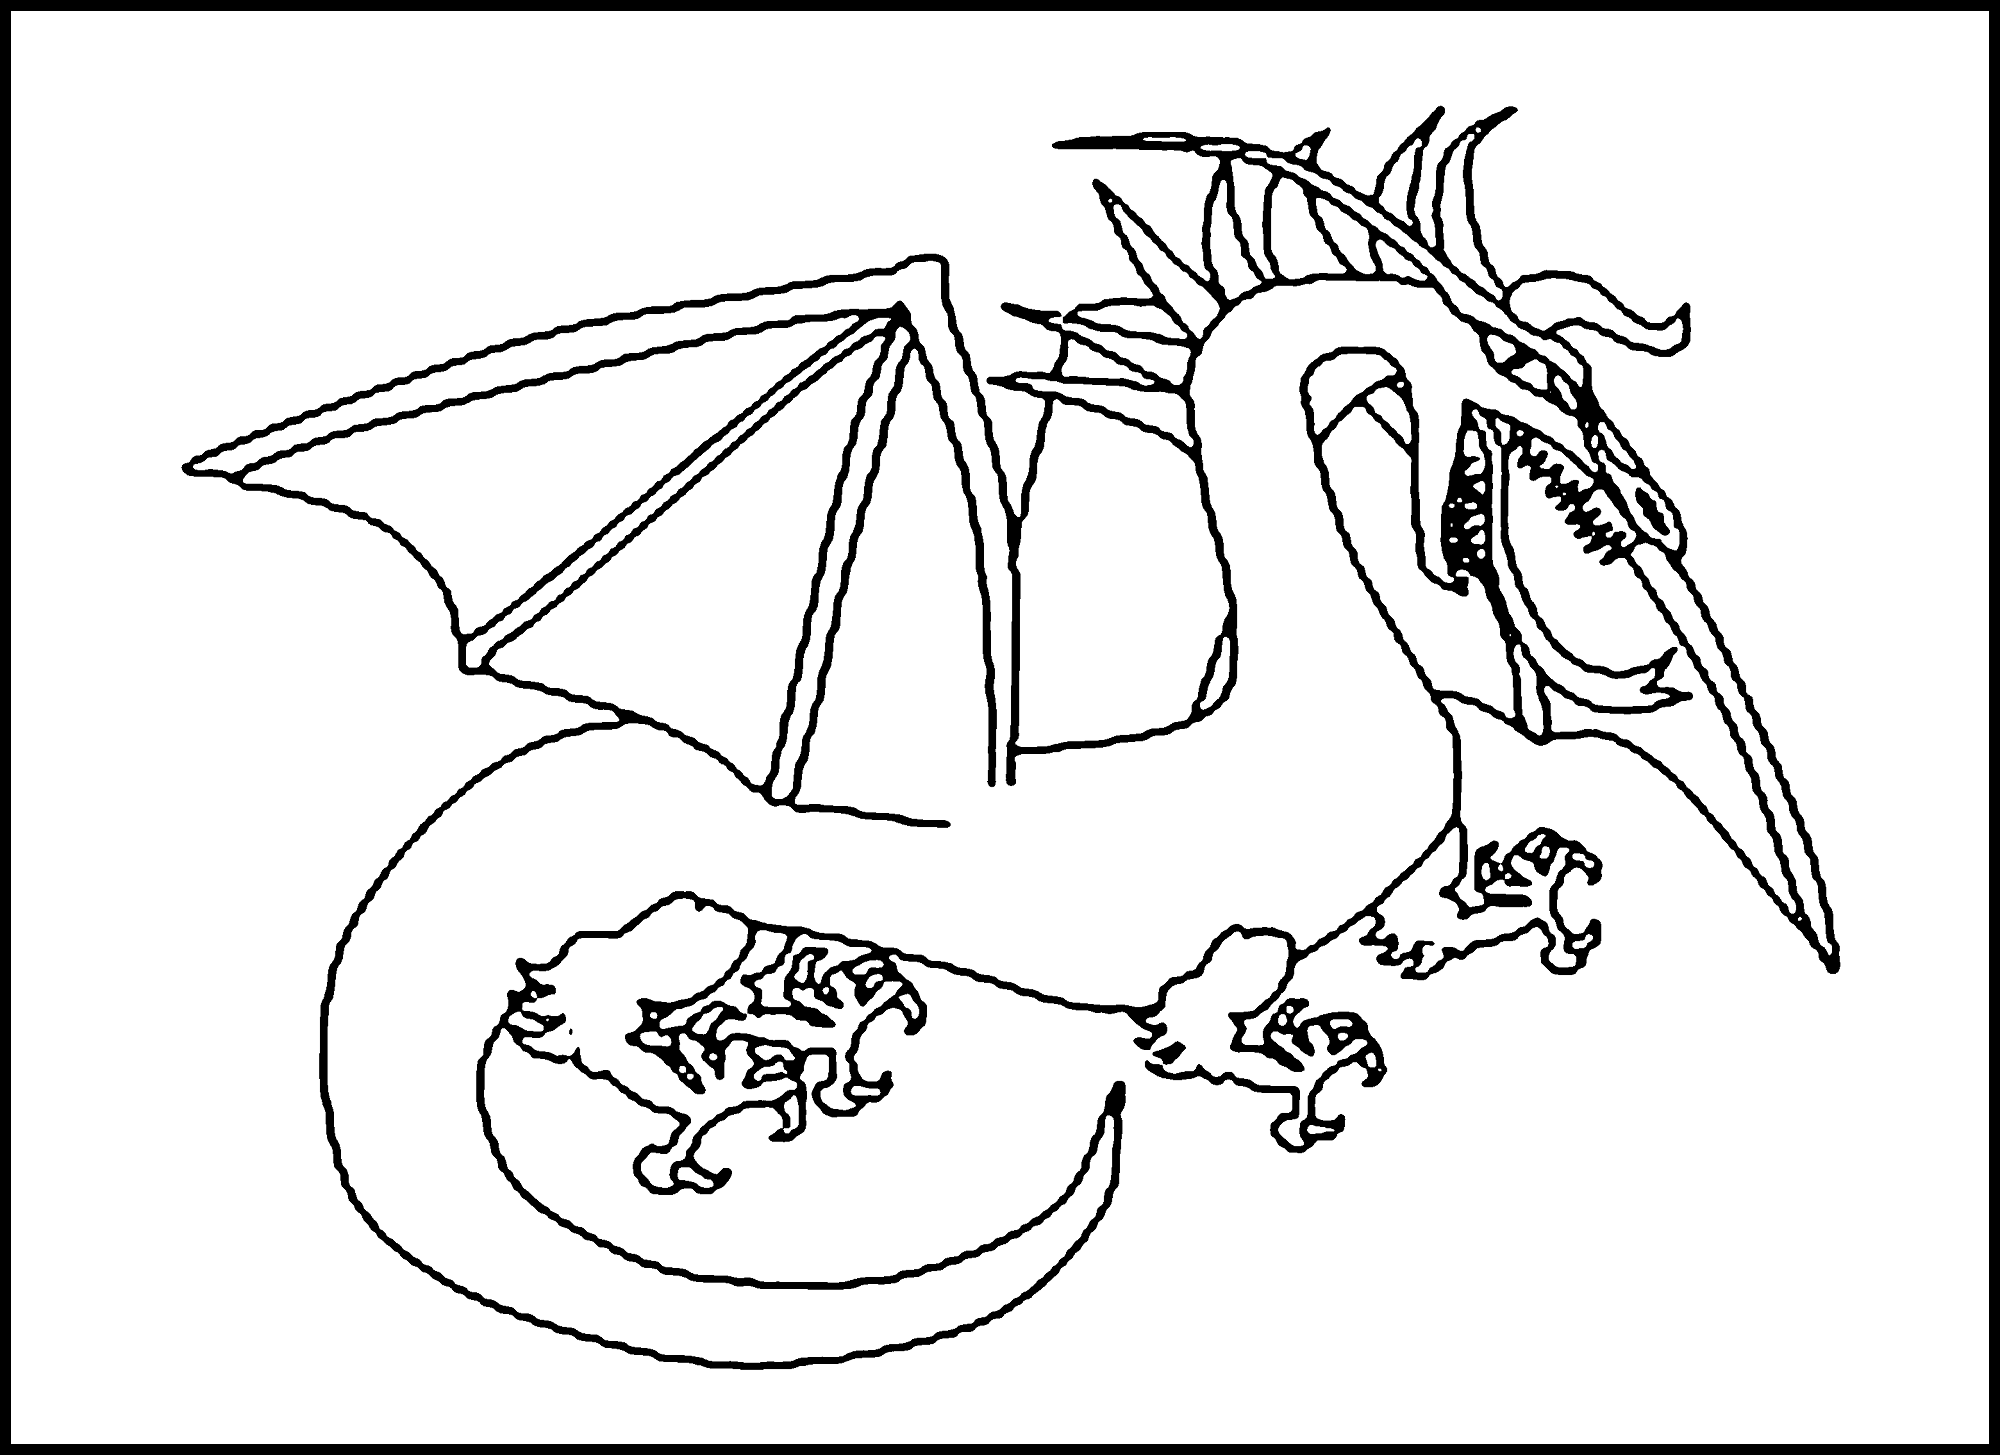 printable coloring pages dragons dragon coloring pages getcoloringpagescom coloring dragons printable pages 